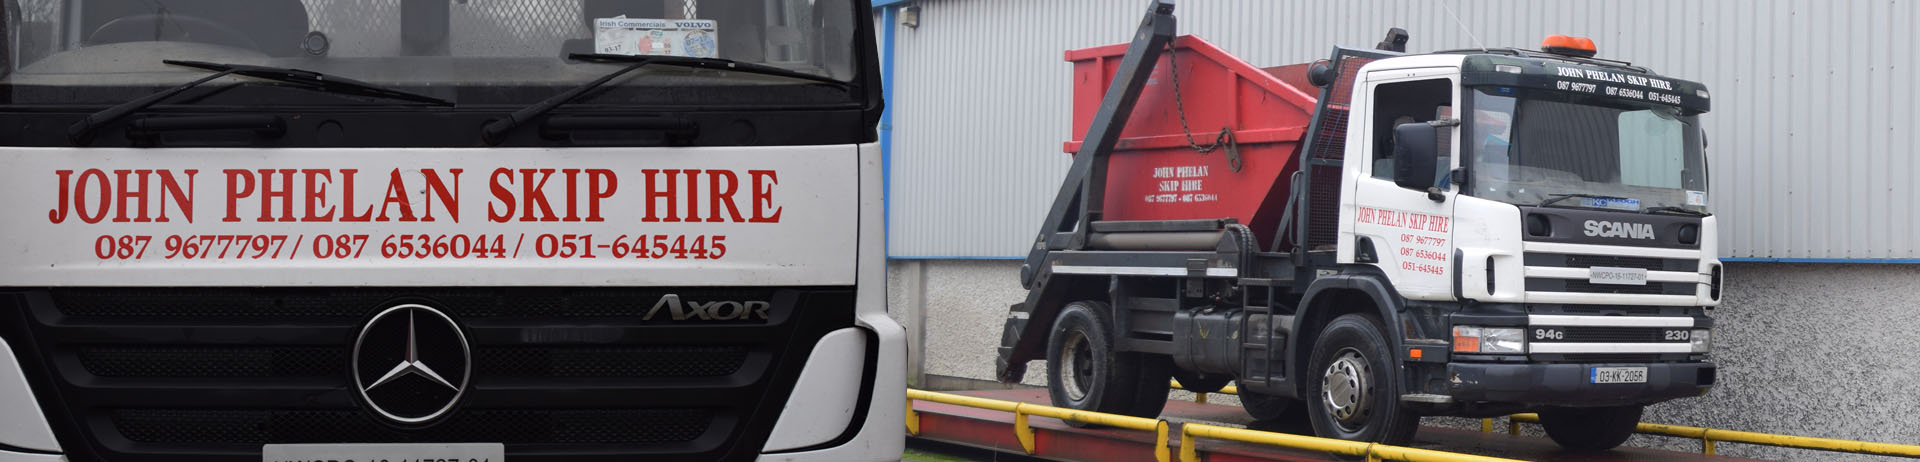 skip hire about us header